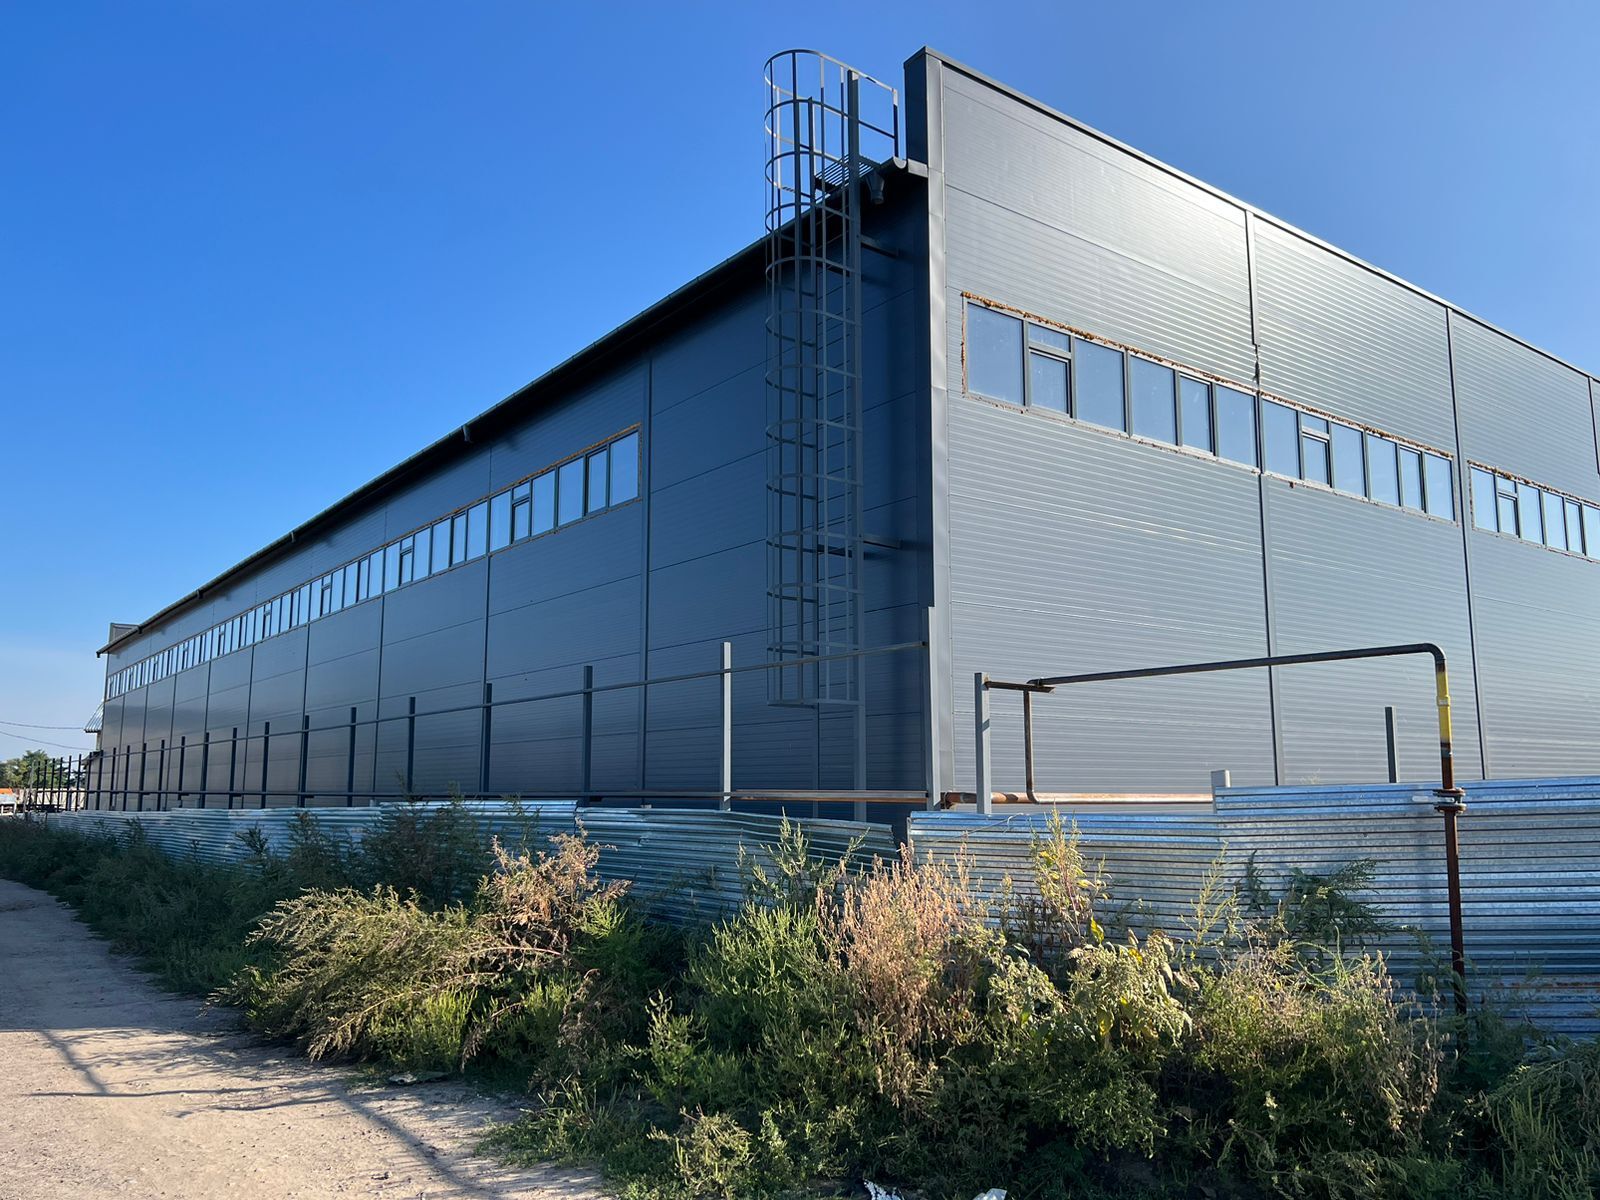 A new Warehouse